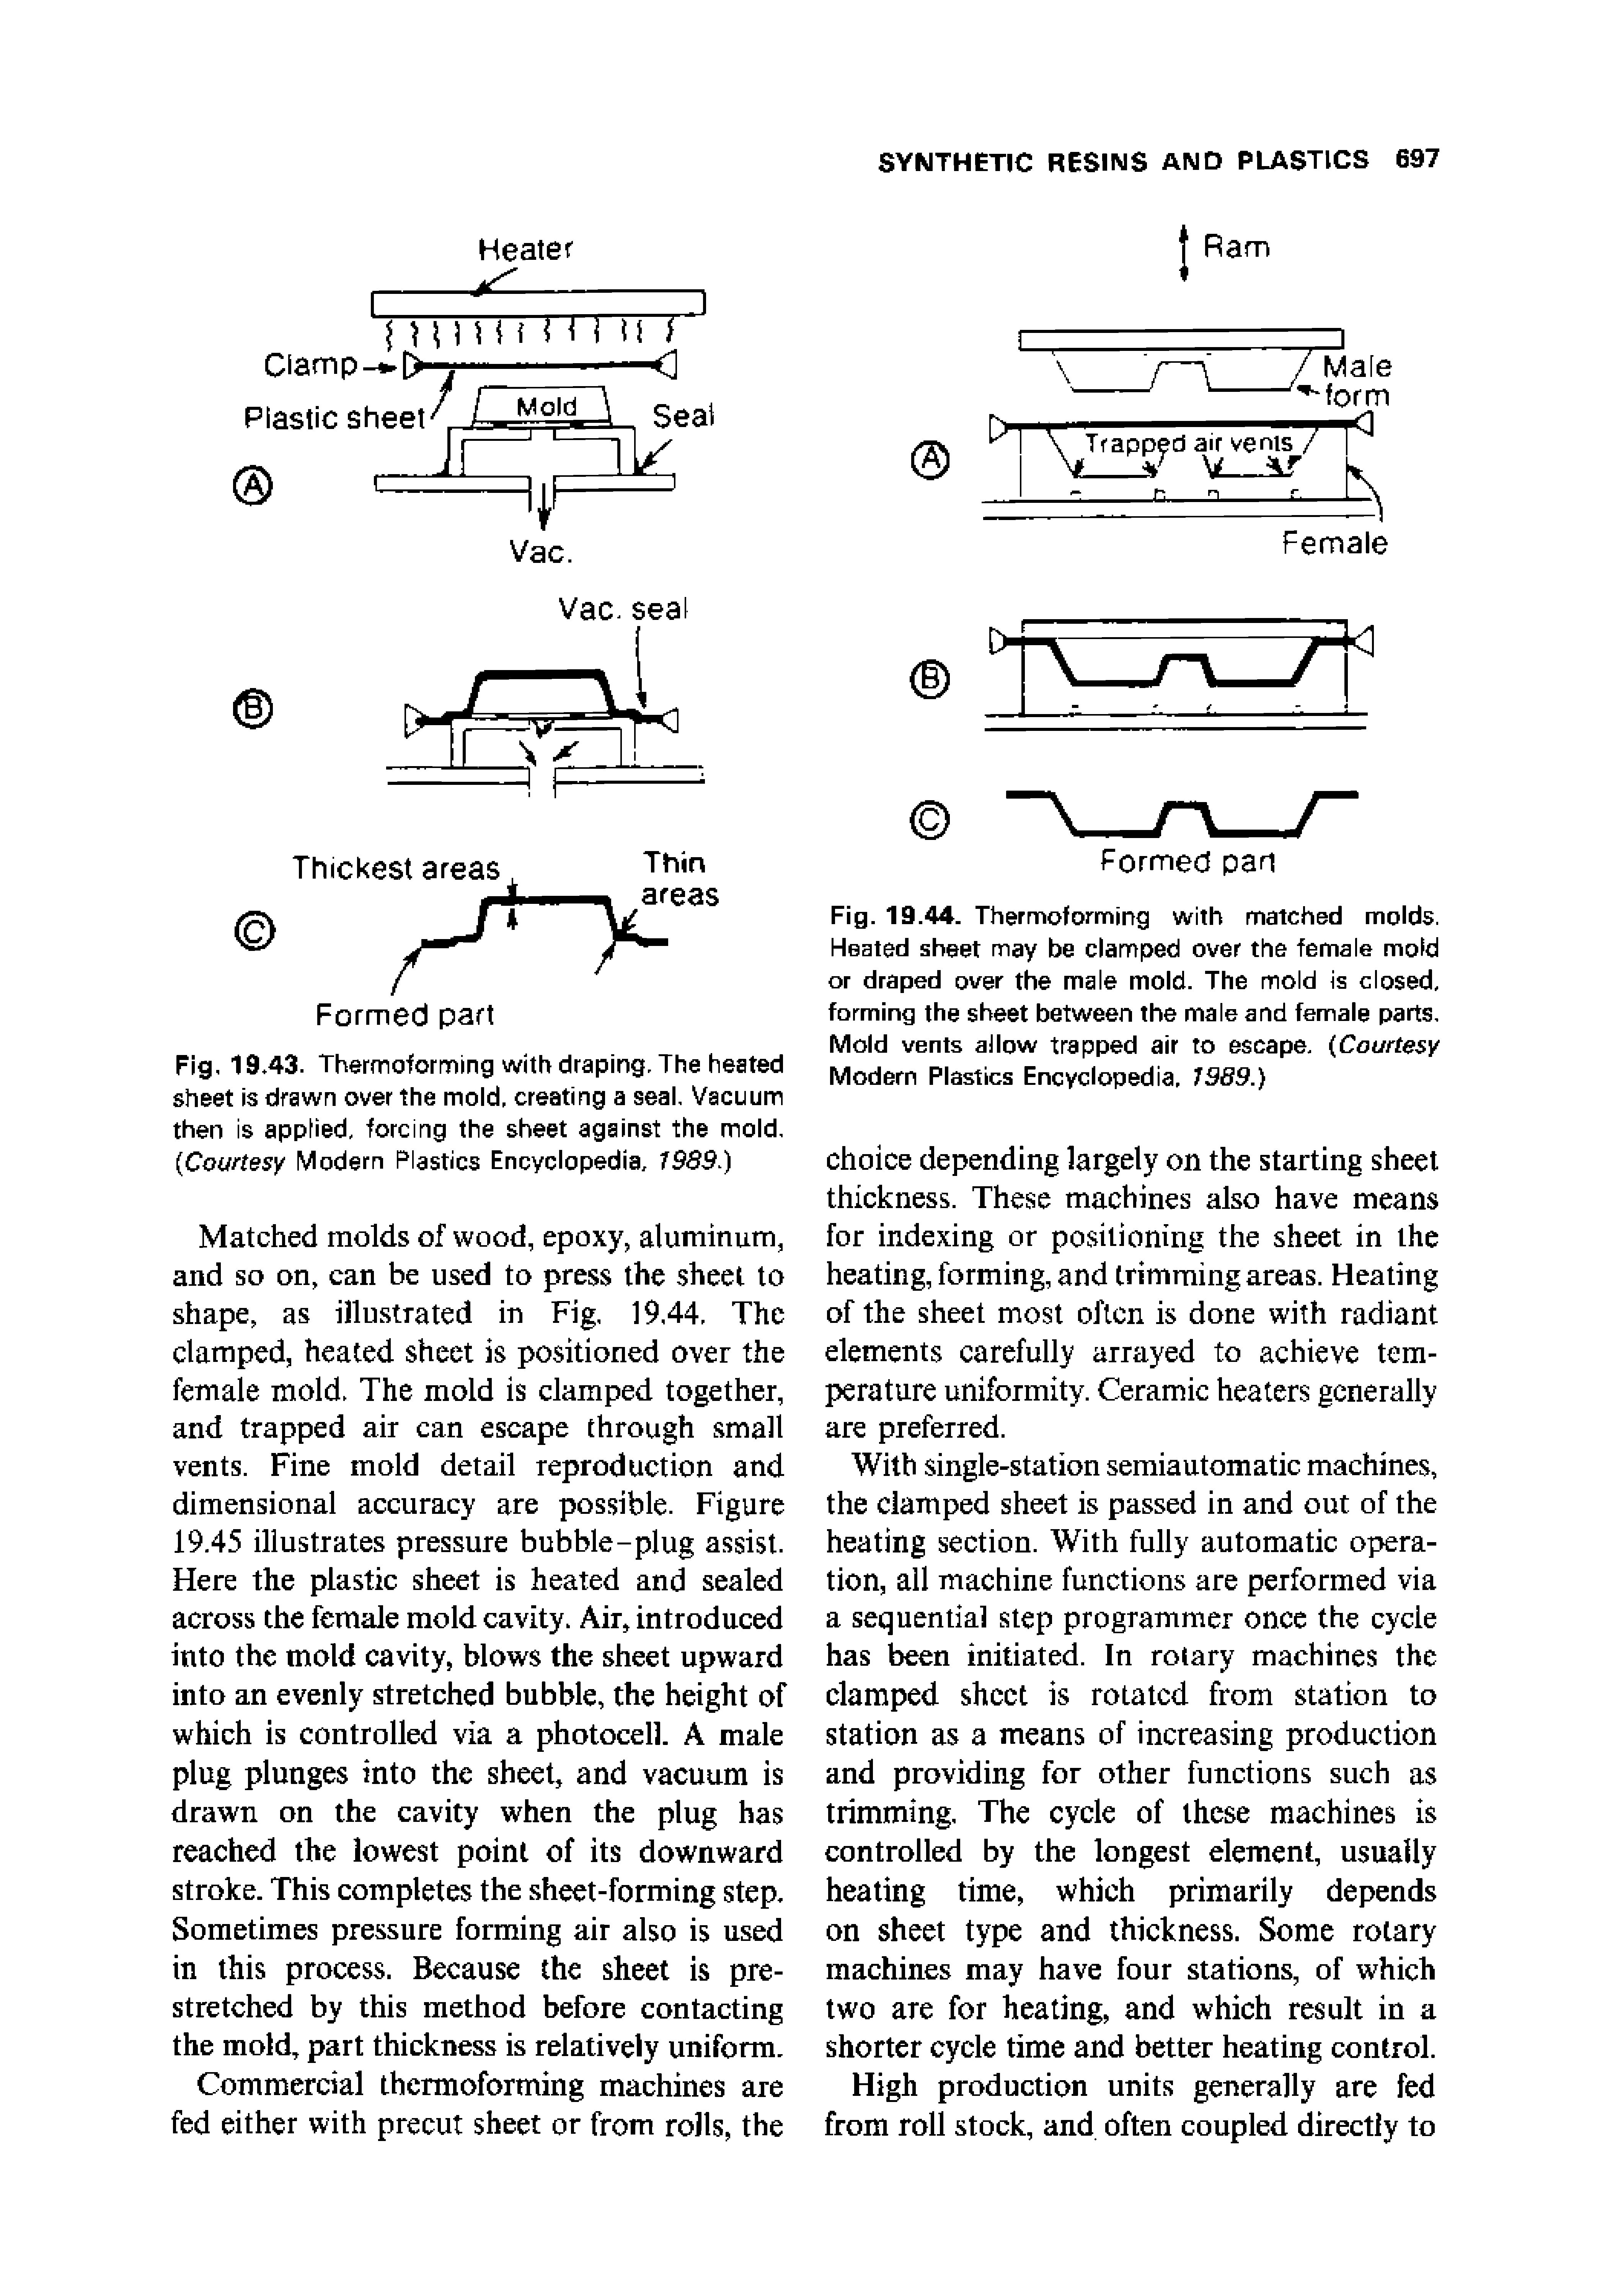 Fig. 19.44. Thermoforming with matched molds. Heated sheet may be clamped over the female mold or draped over the male mold. The mold is closed, forming the sheet between the male and female parts. Mold vents allow trapped air to escape. Courtesy Modern Plastics Encyclopedia, 1989.)...